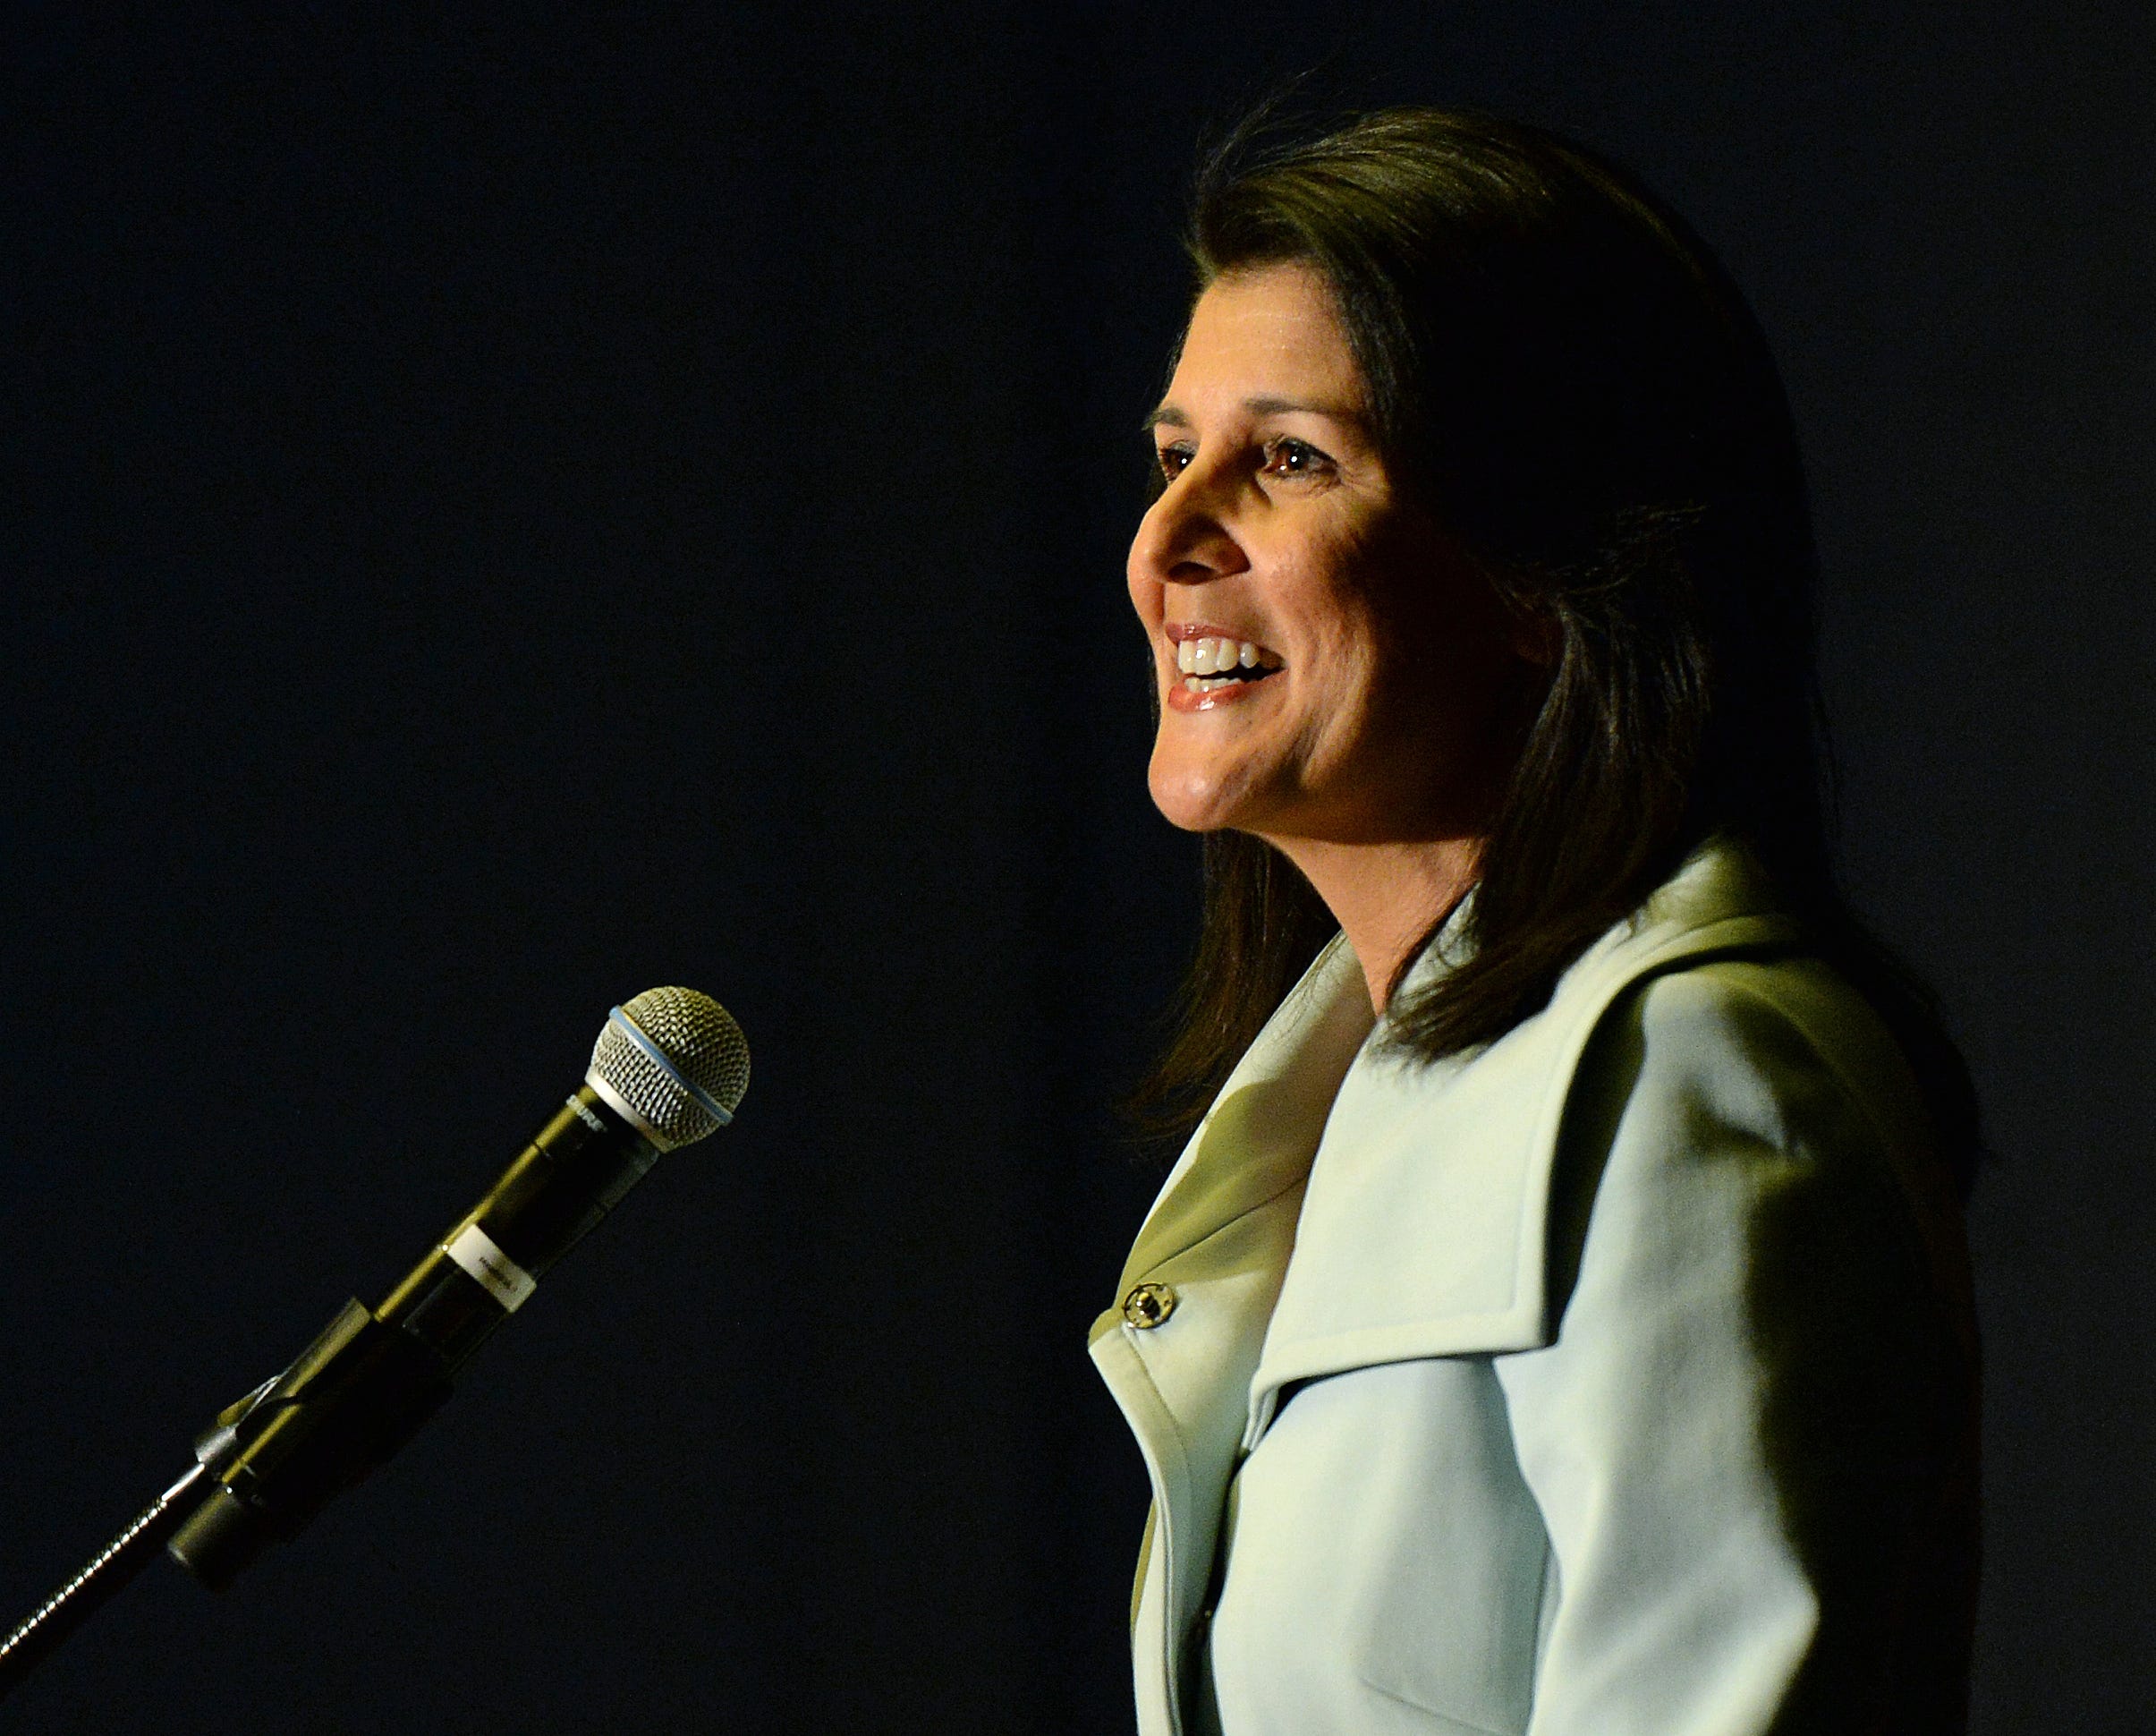 Nikki Haley discusses the Presidential race